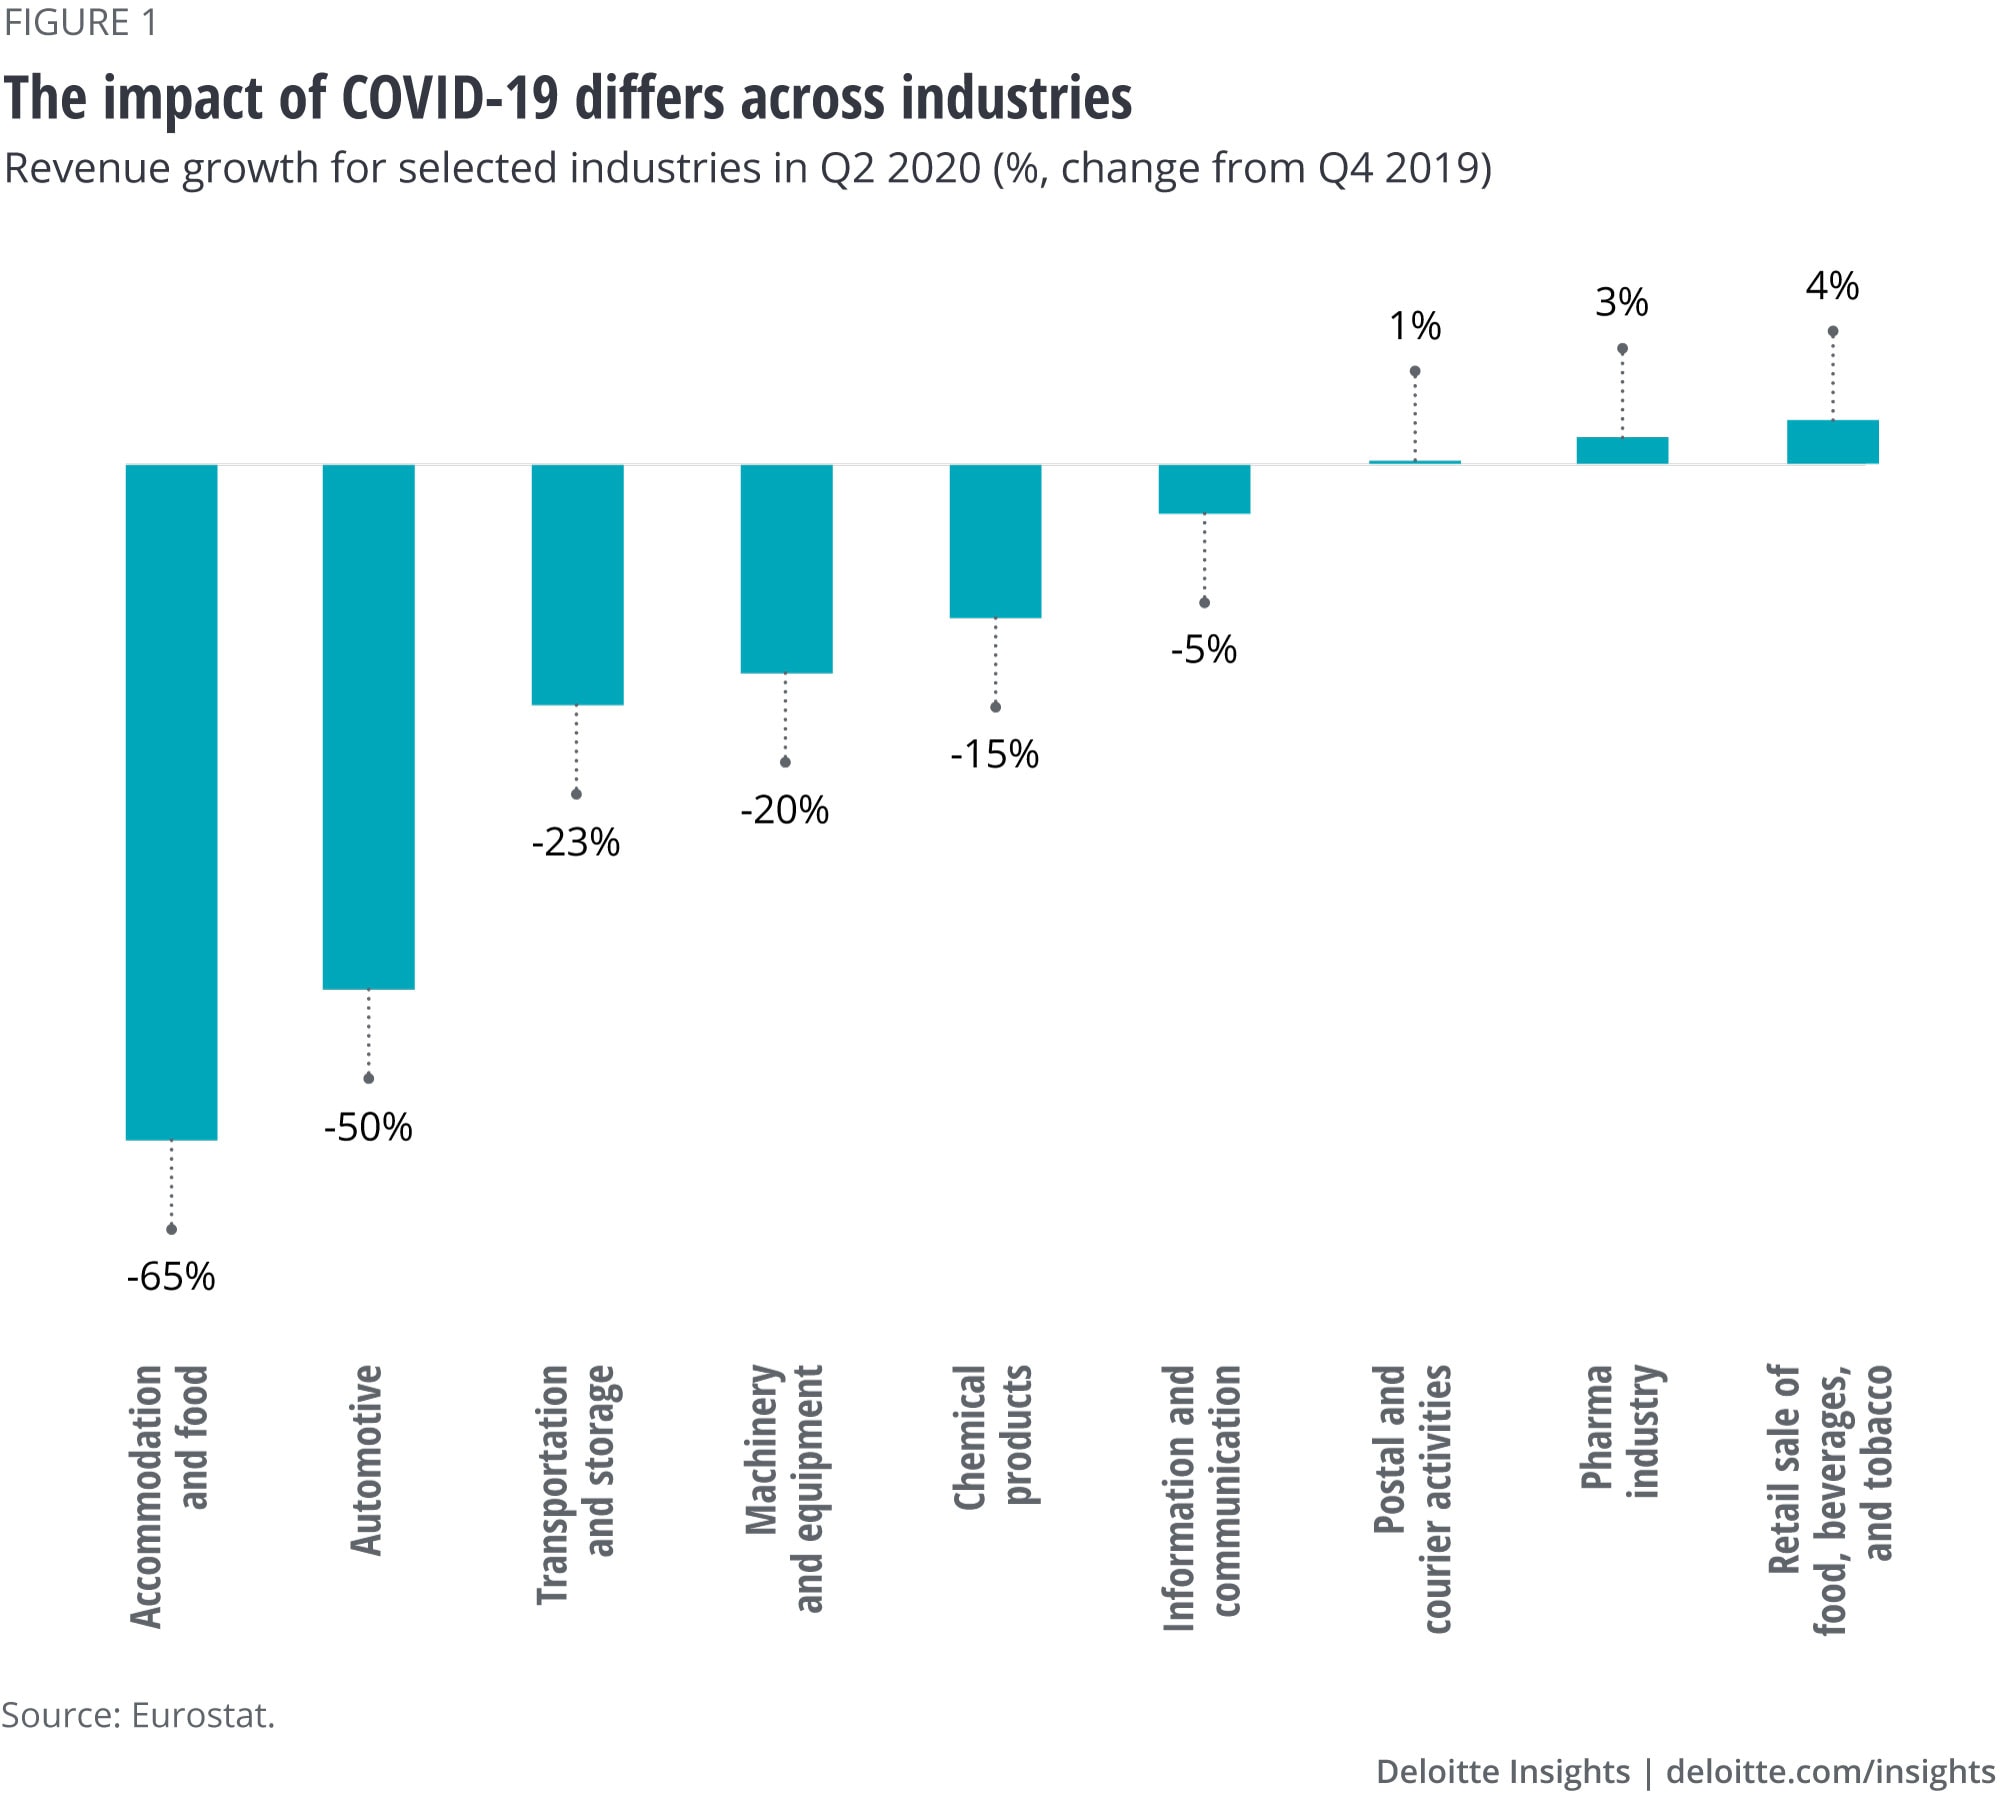 The impact of COVID-19 differs across industries